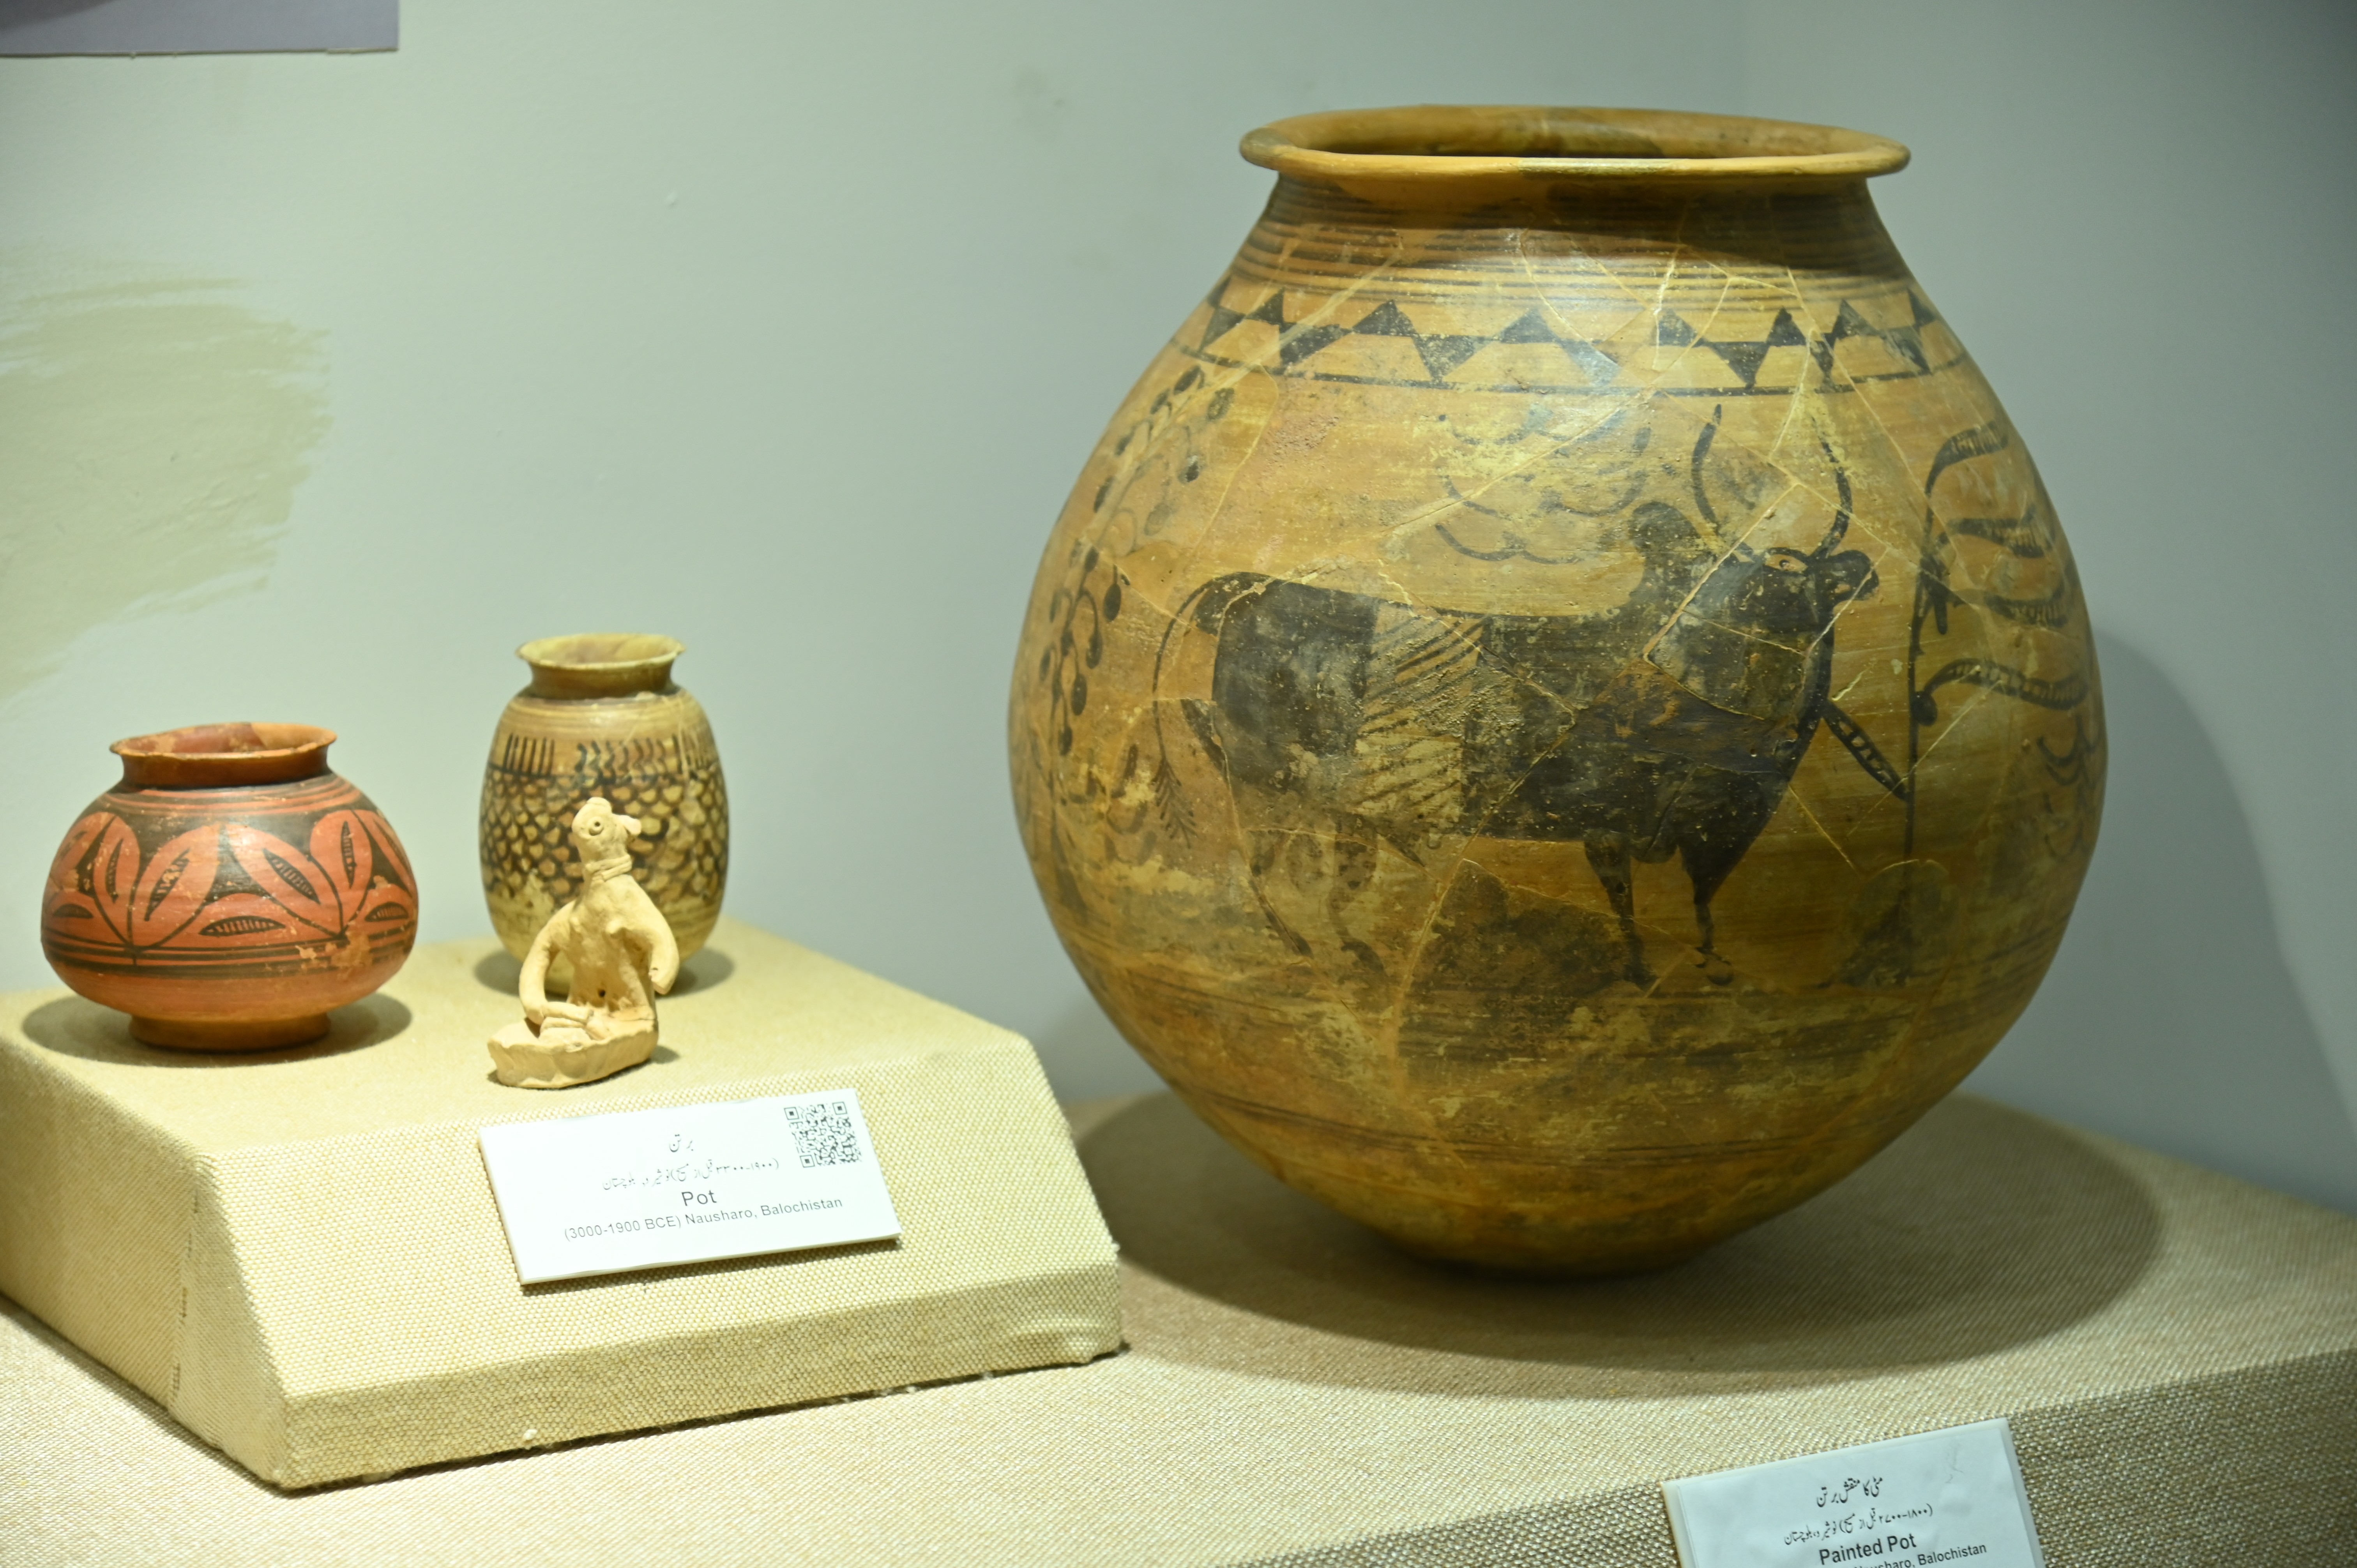 The painted pots preserved in the Sir Syed Memorial Museum